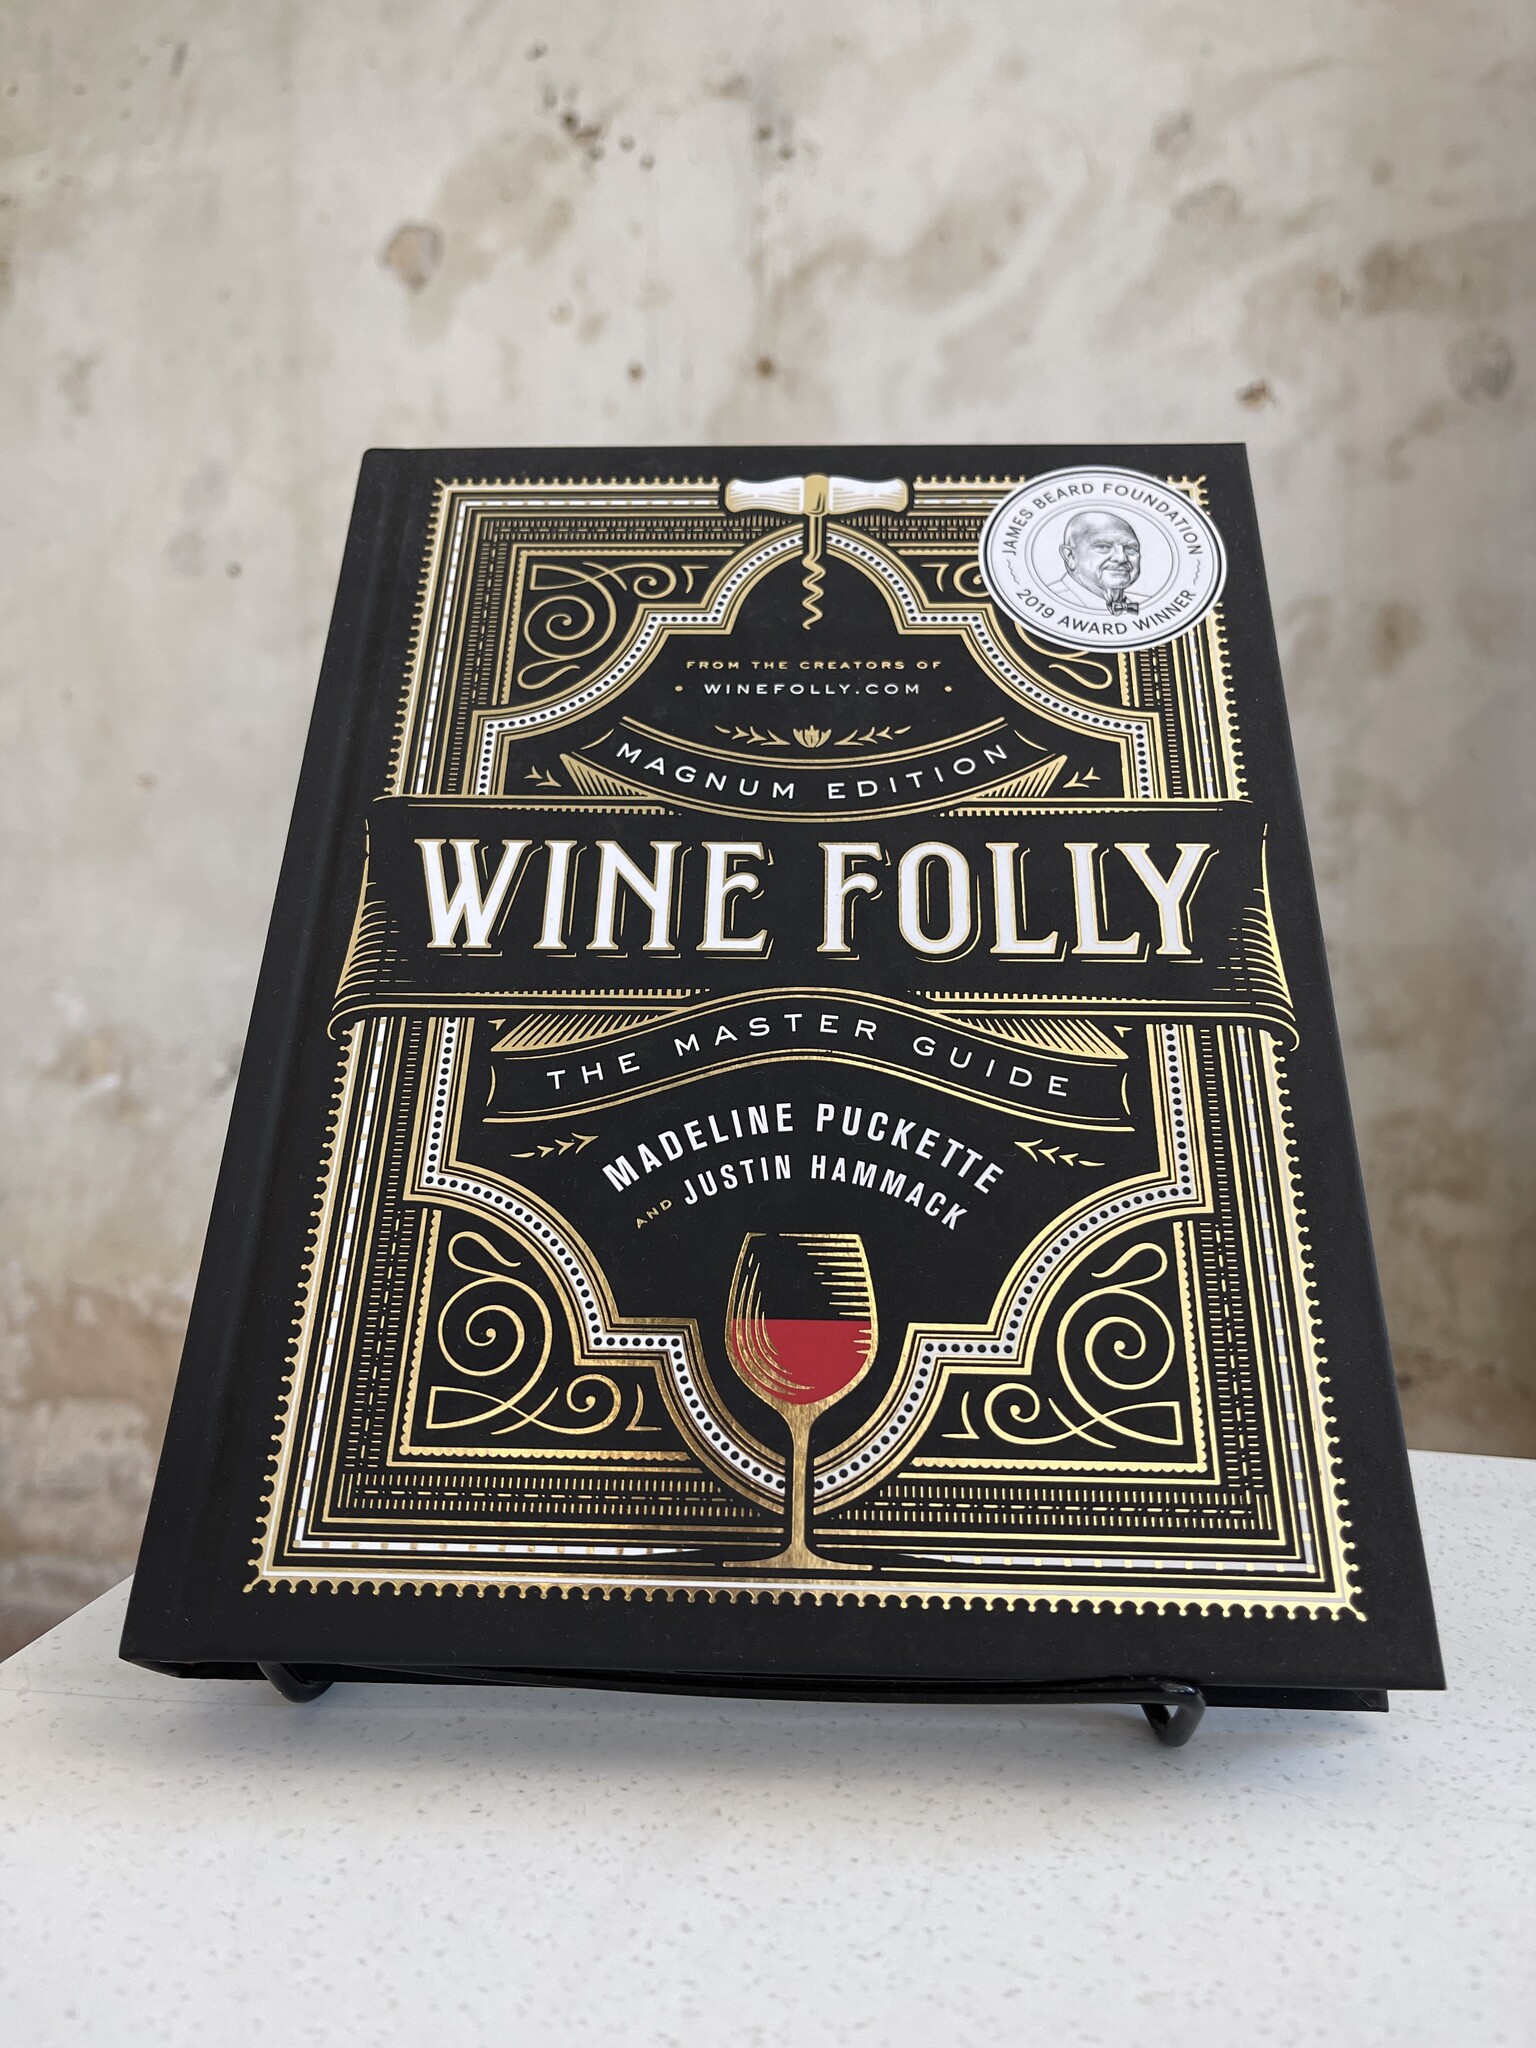 Wine Folly: Magnum Edition by Puckette & Hammack